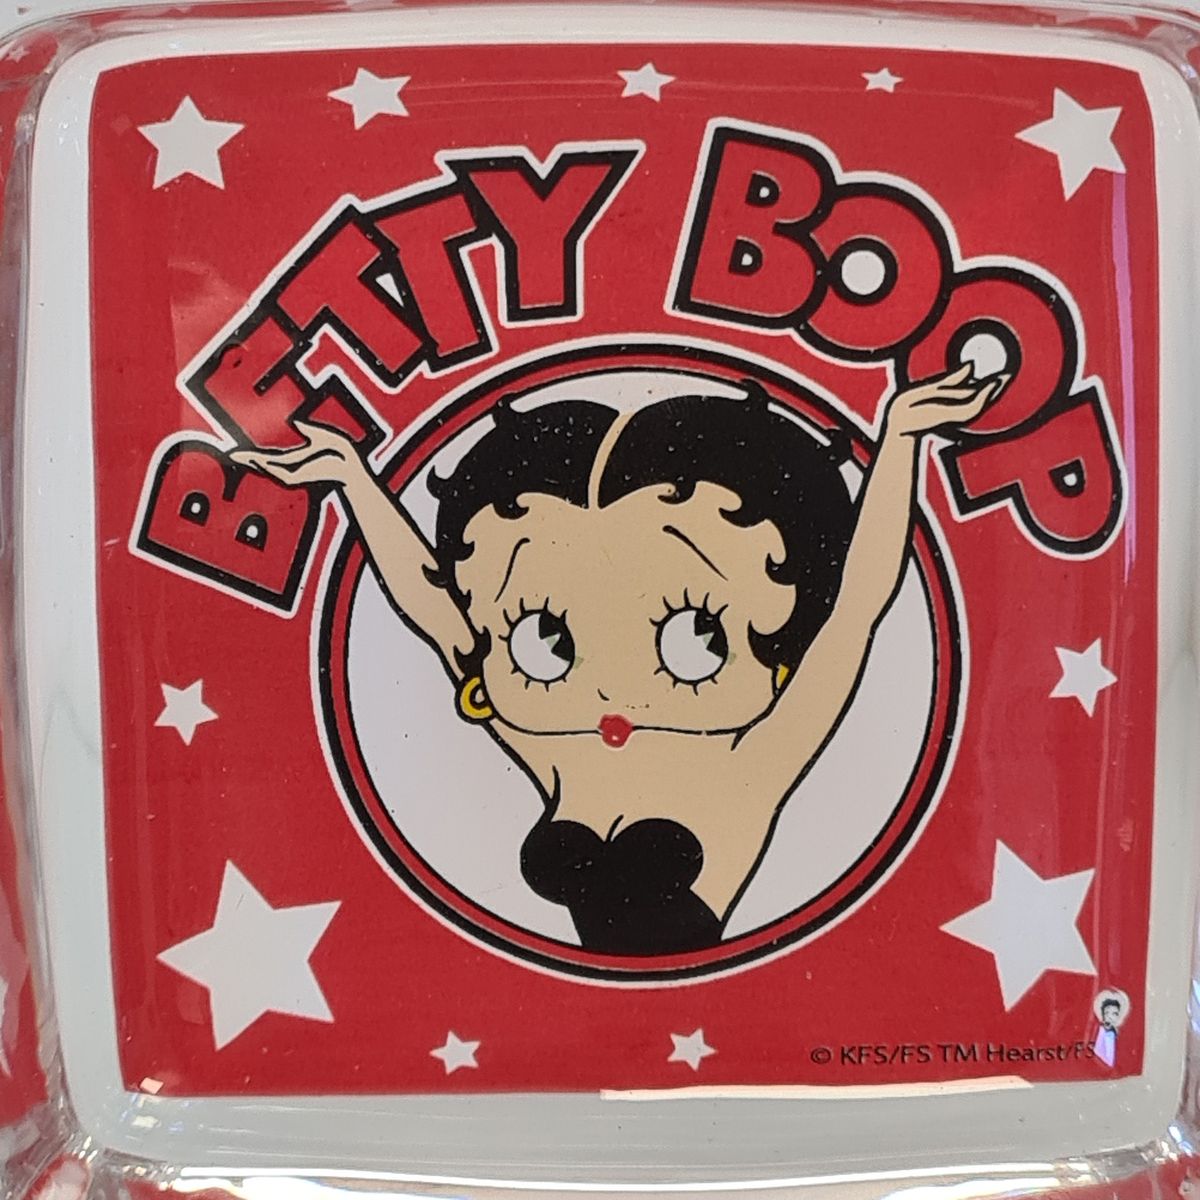 Cendrier carr Betty Boop